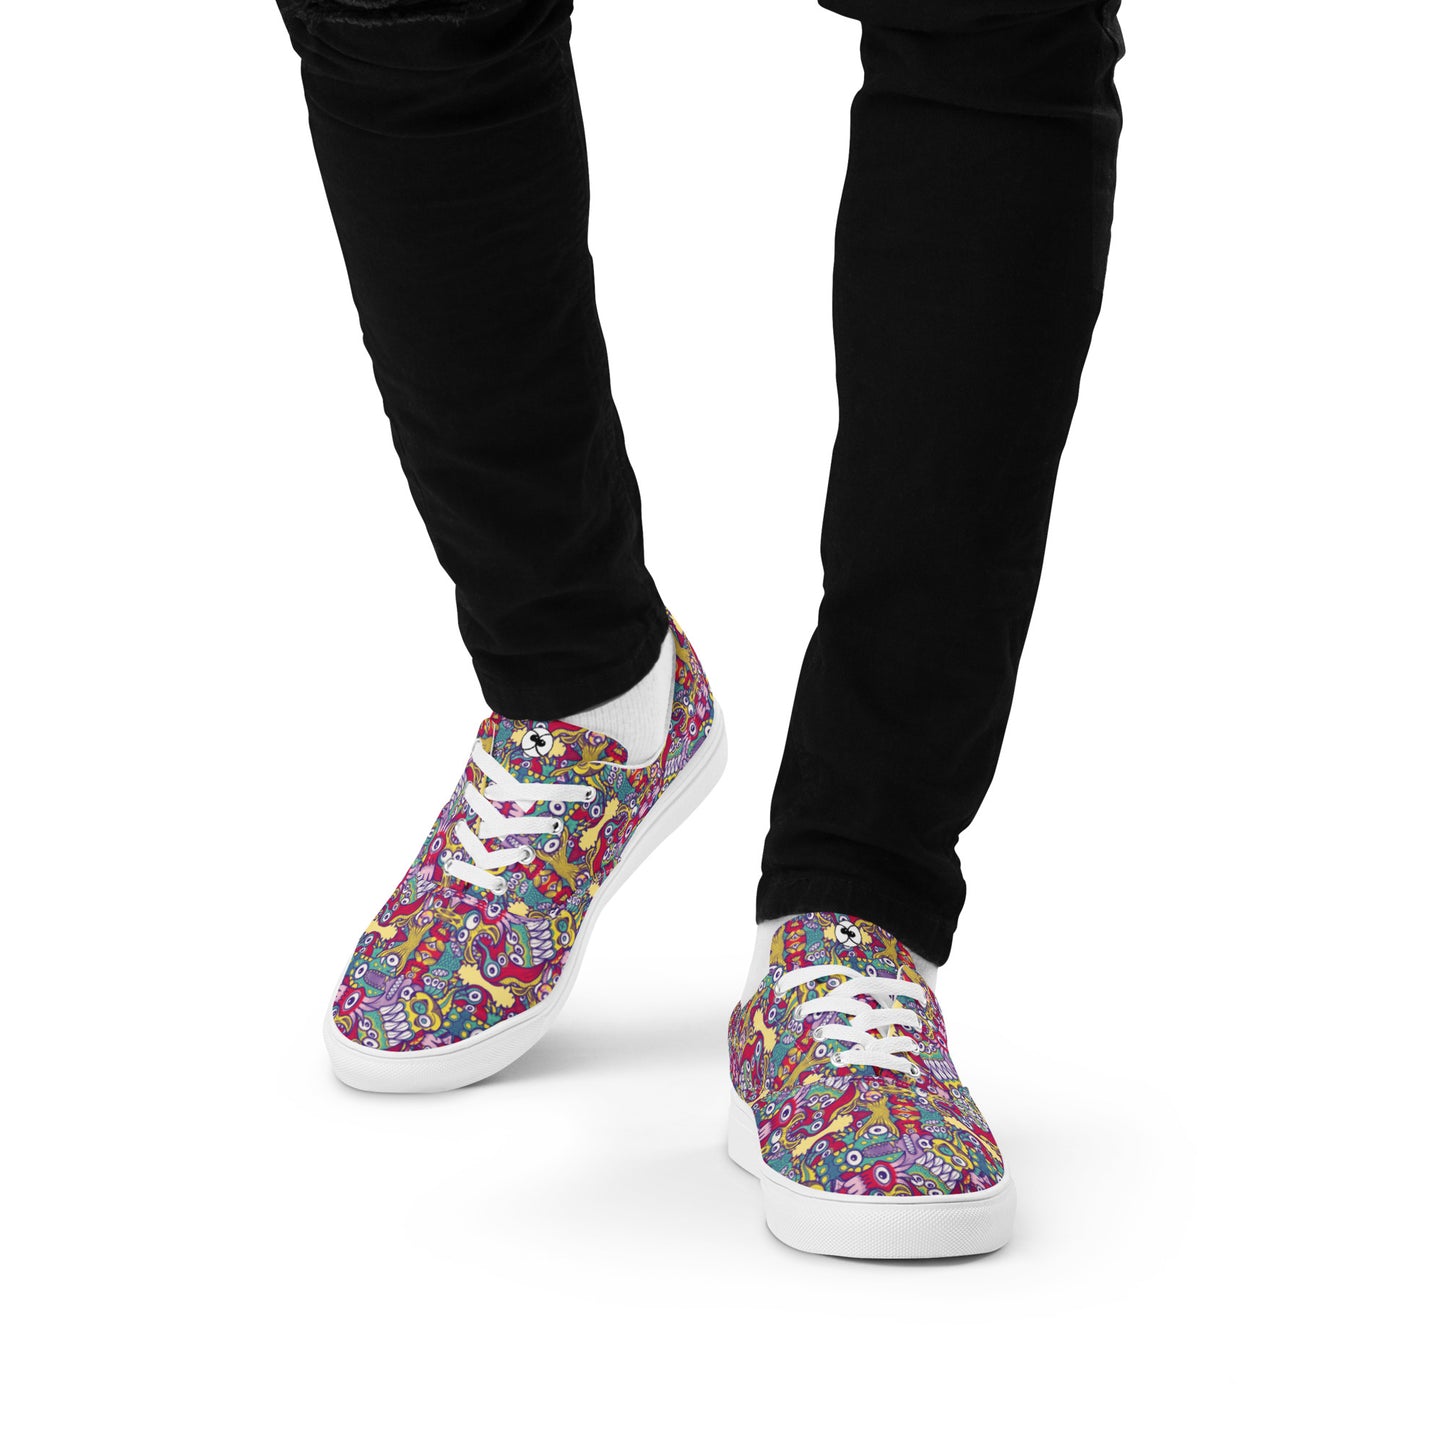 Exquisite corpse of doodles in a pattern design Men’s lace-up canvas shoes. Lifestyle